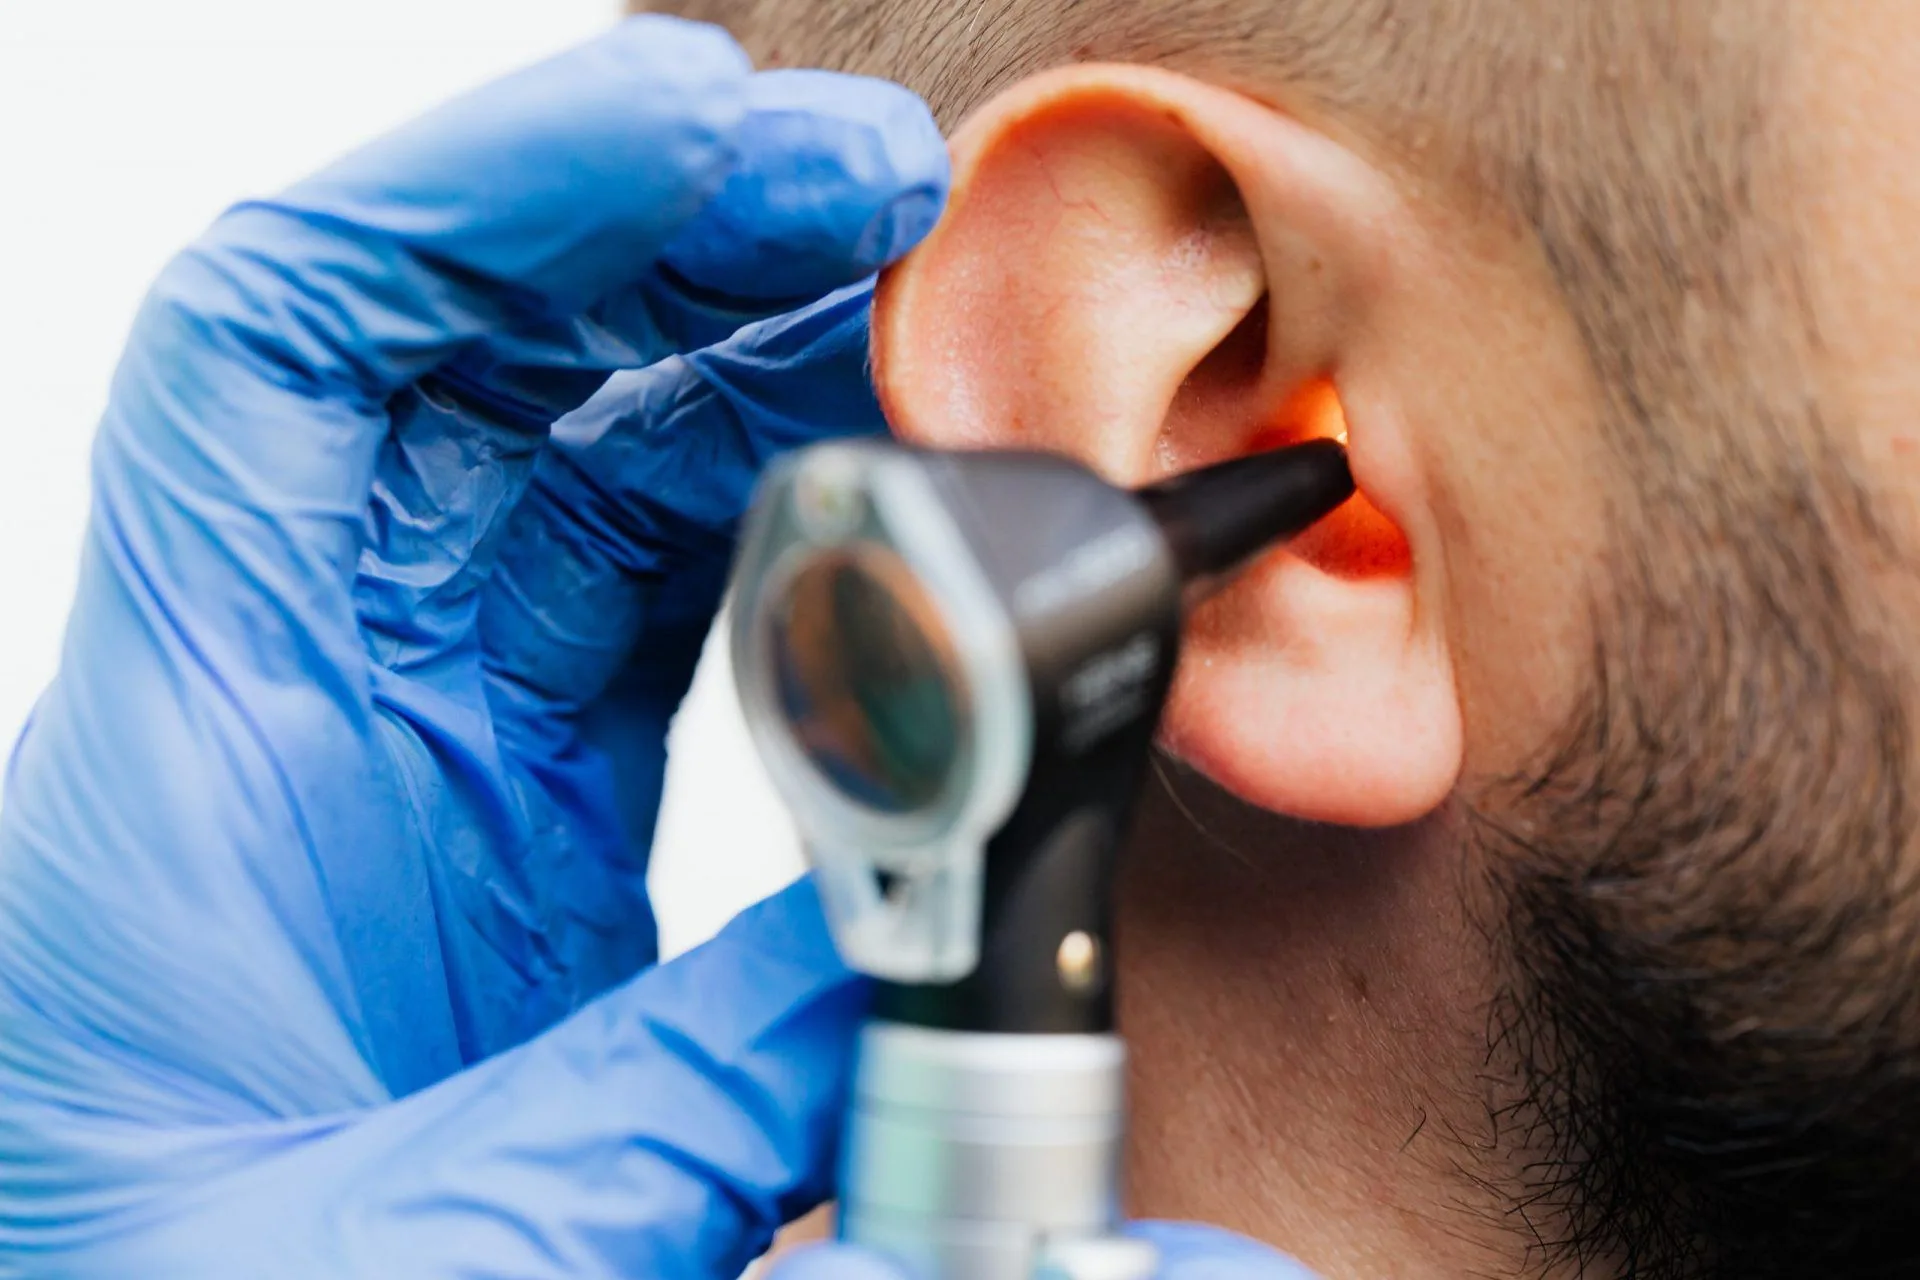 Hearing Loss: Symptoms, Risk Factors, and Prevention